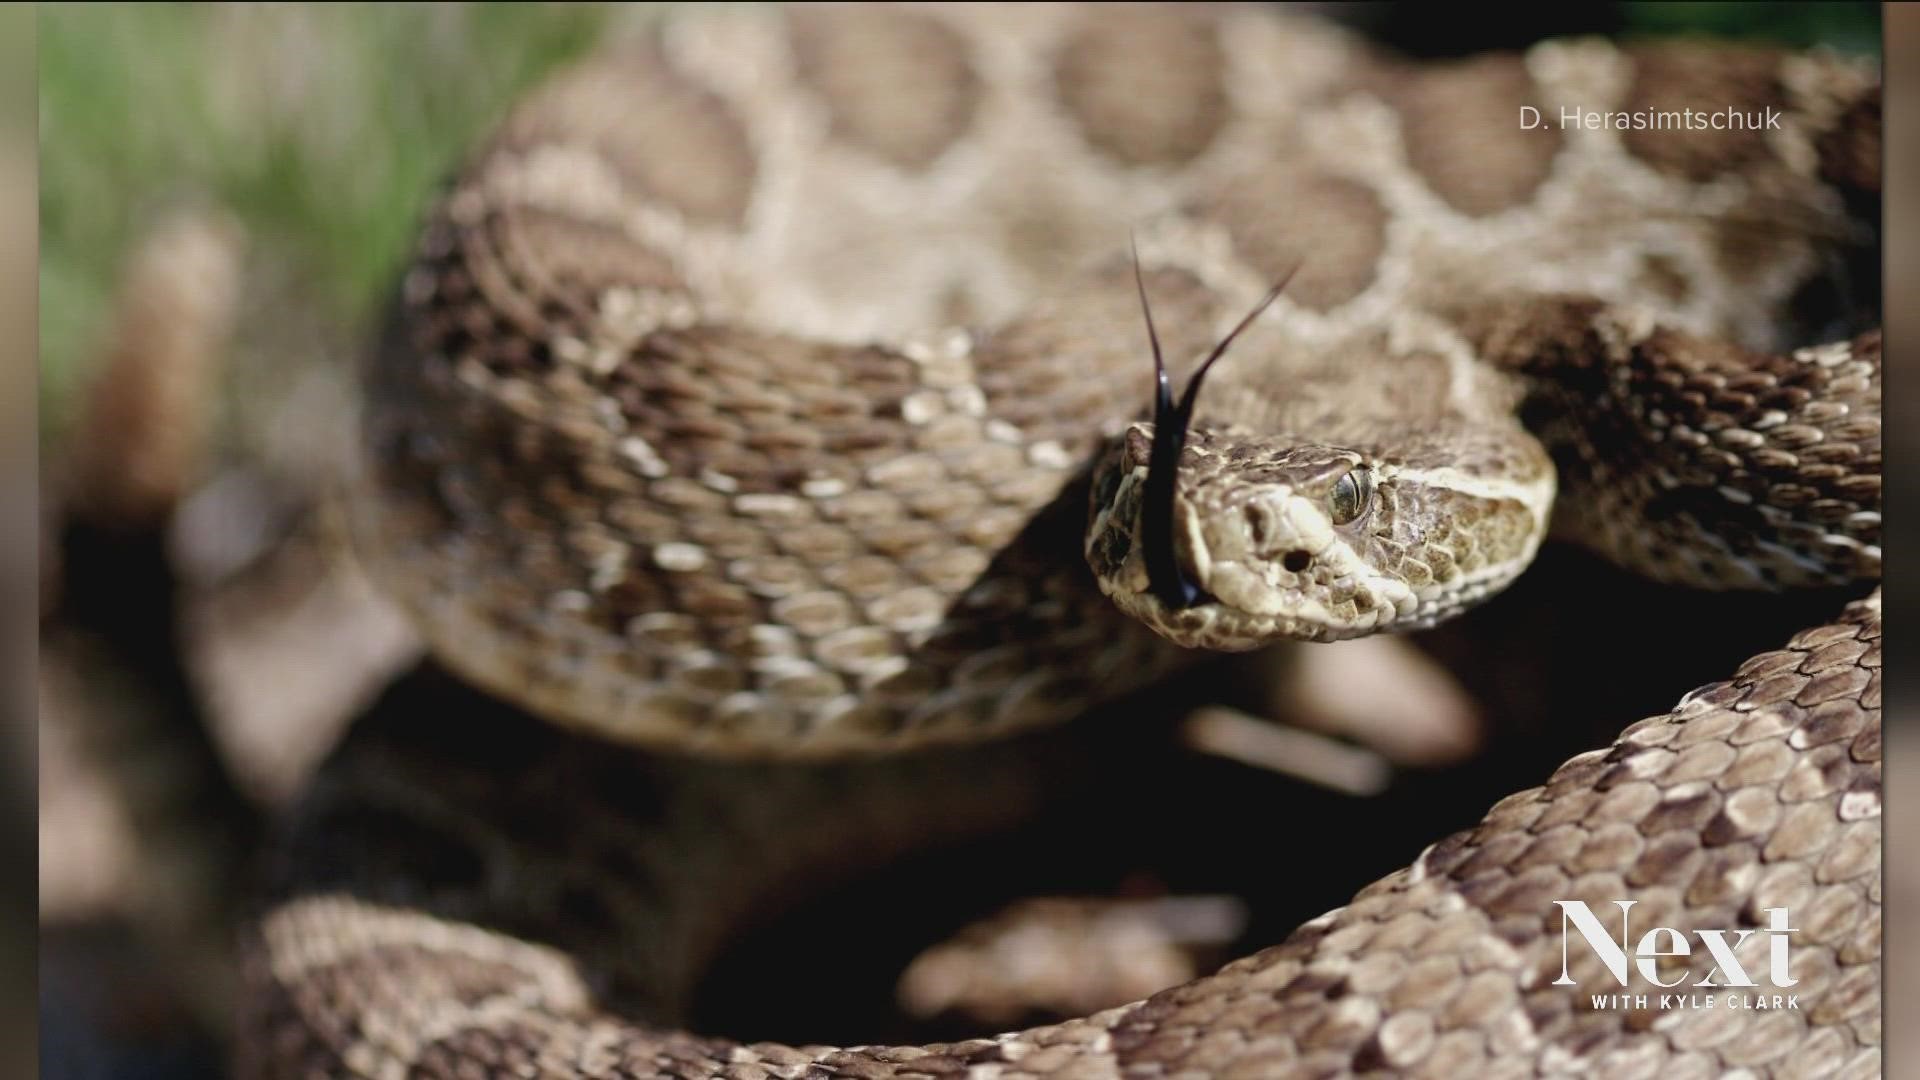 Warmer weather draws out Colorado's snakes. Only three local breeds are harmful to humans but humans should be smart about interacting with them.